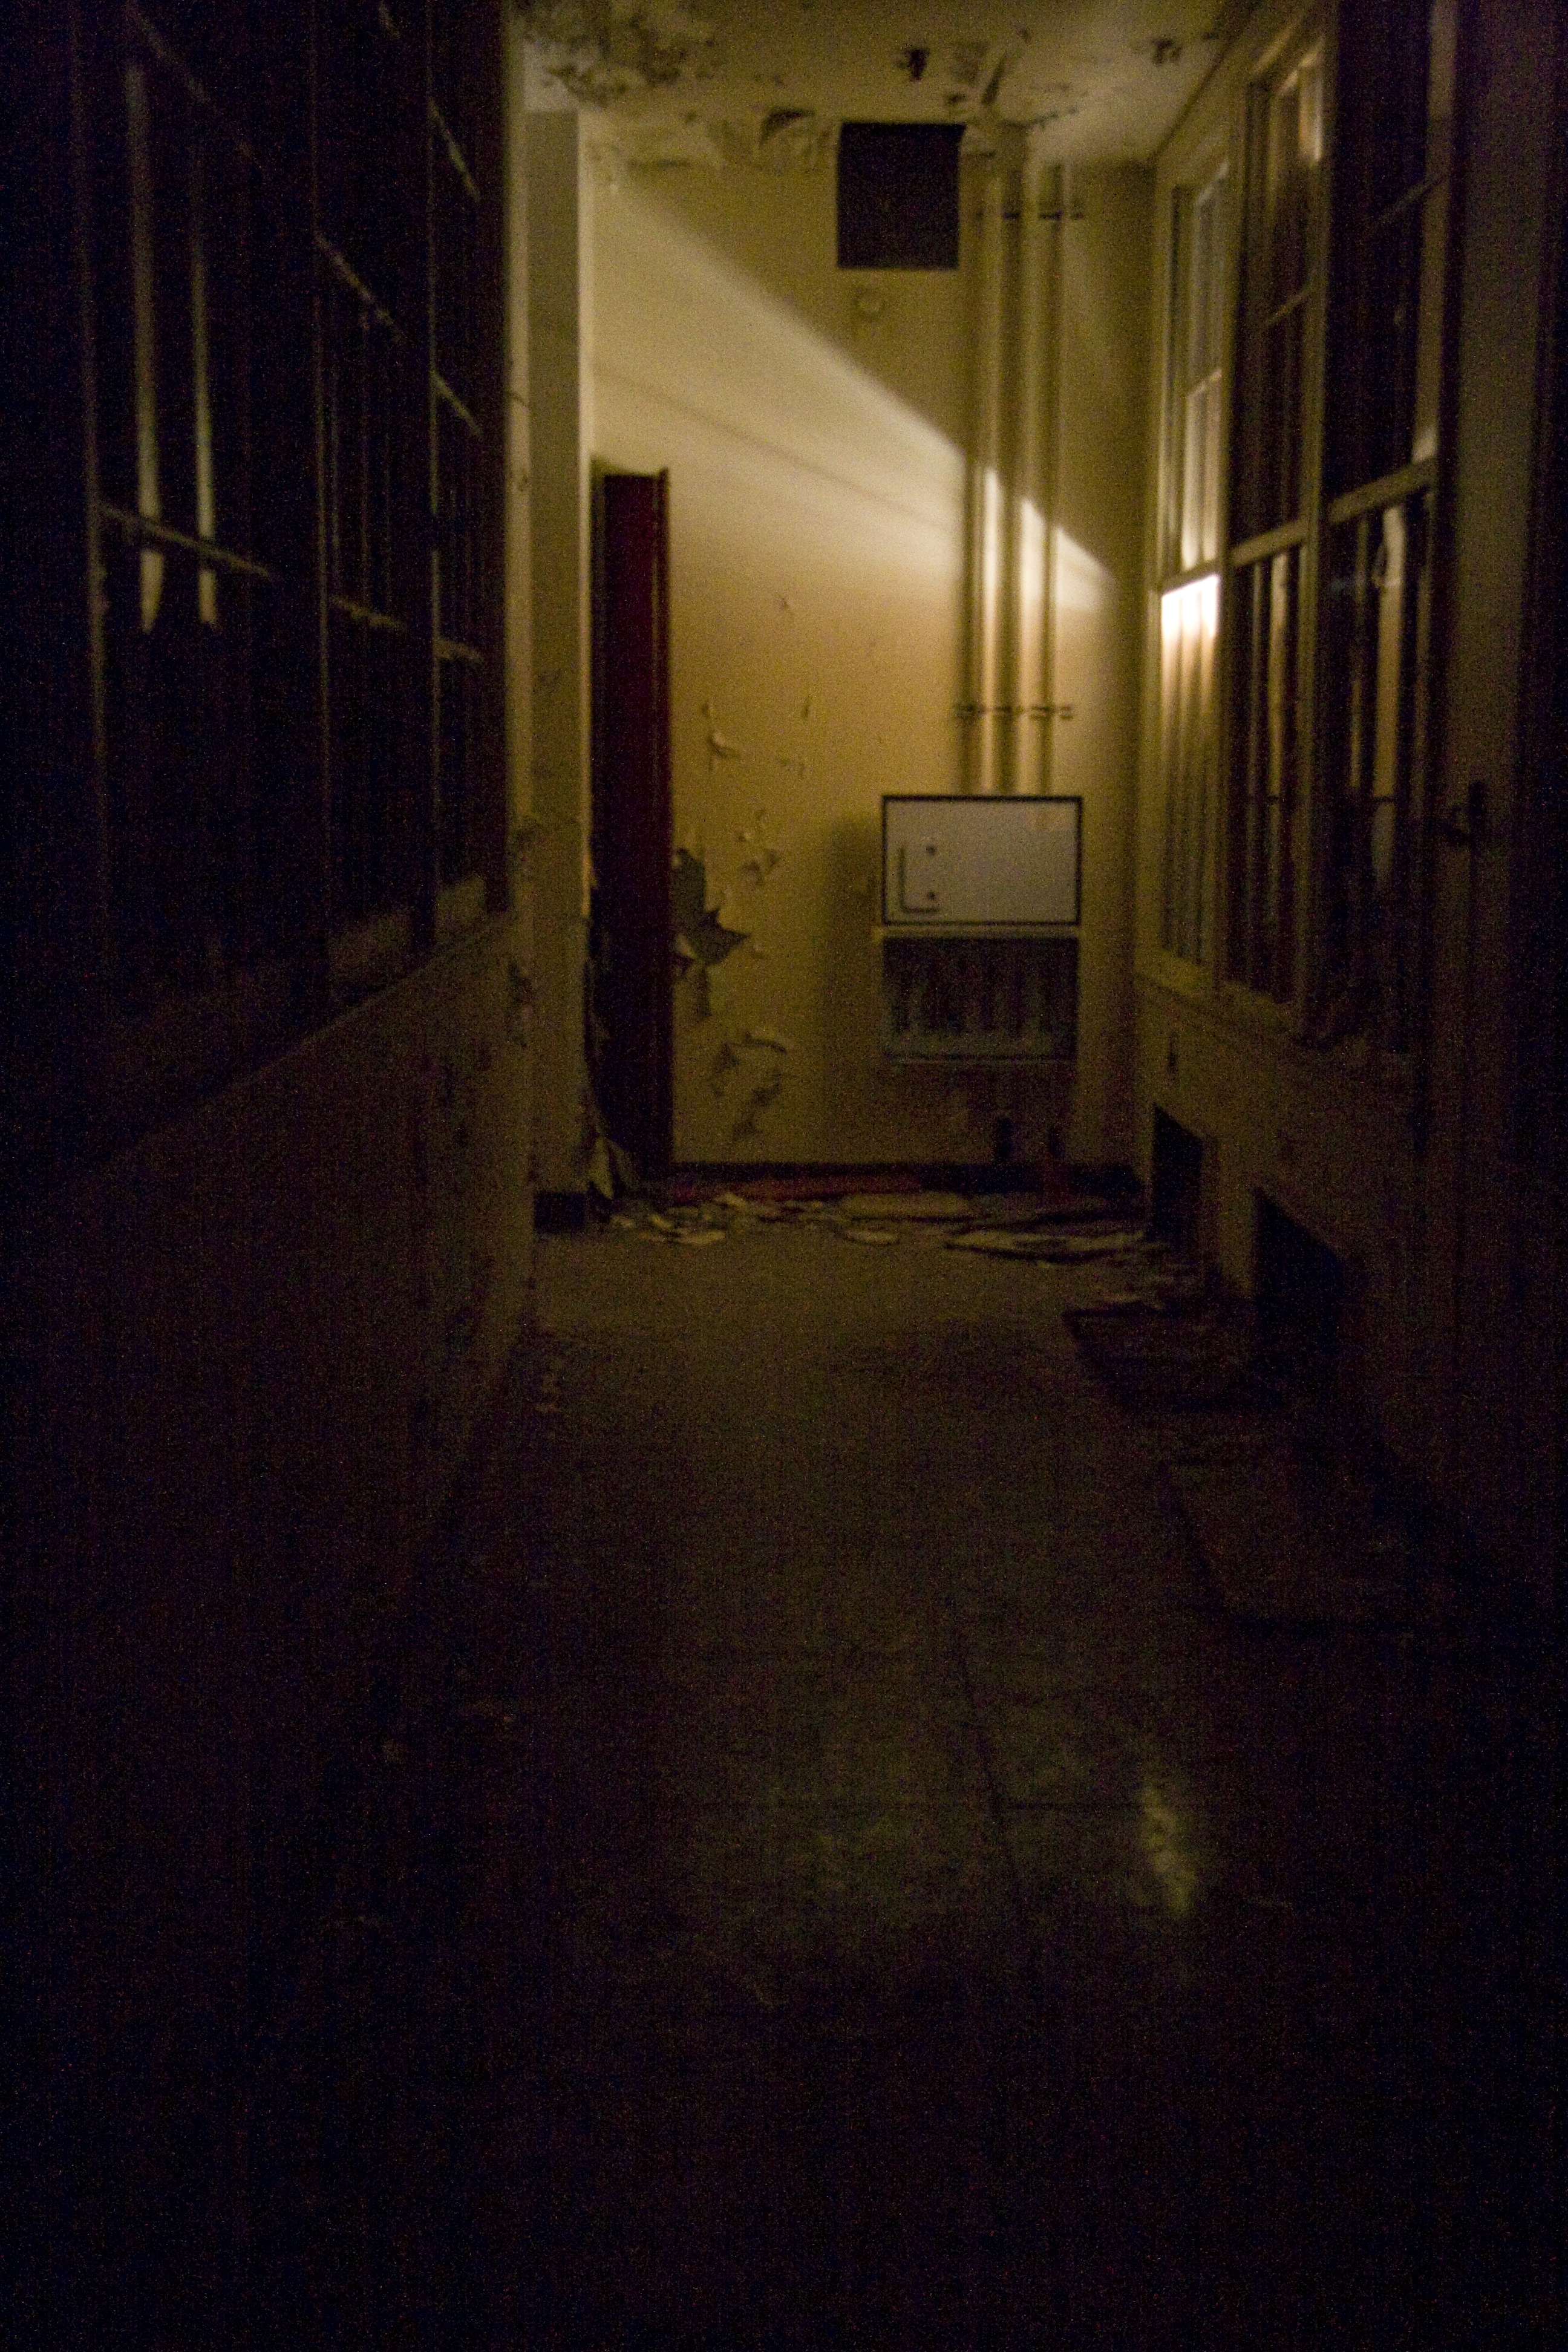 LIGHT ENTERS - a tiny hole in the wall barely provides minimal illumination in this dim corridor.